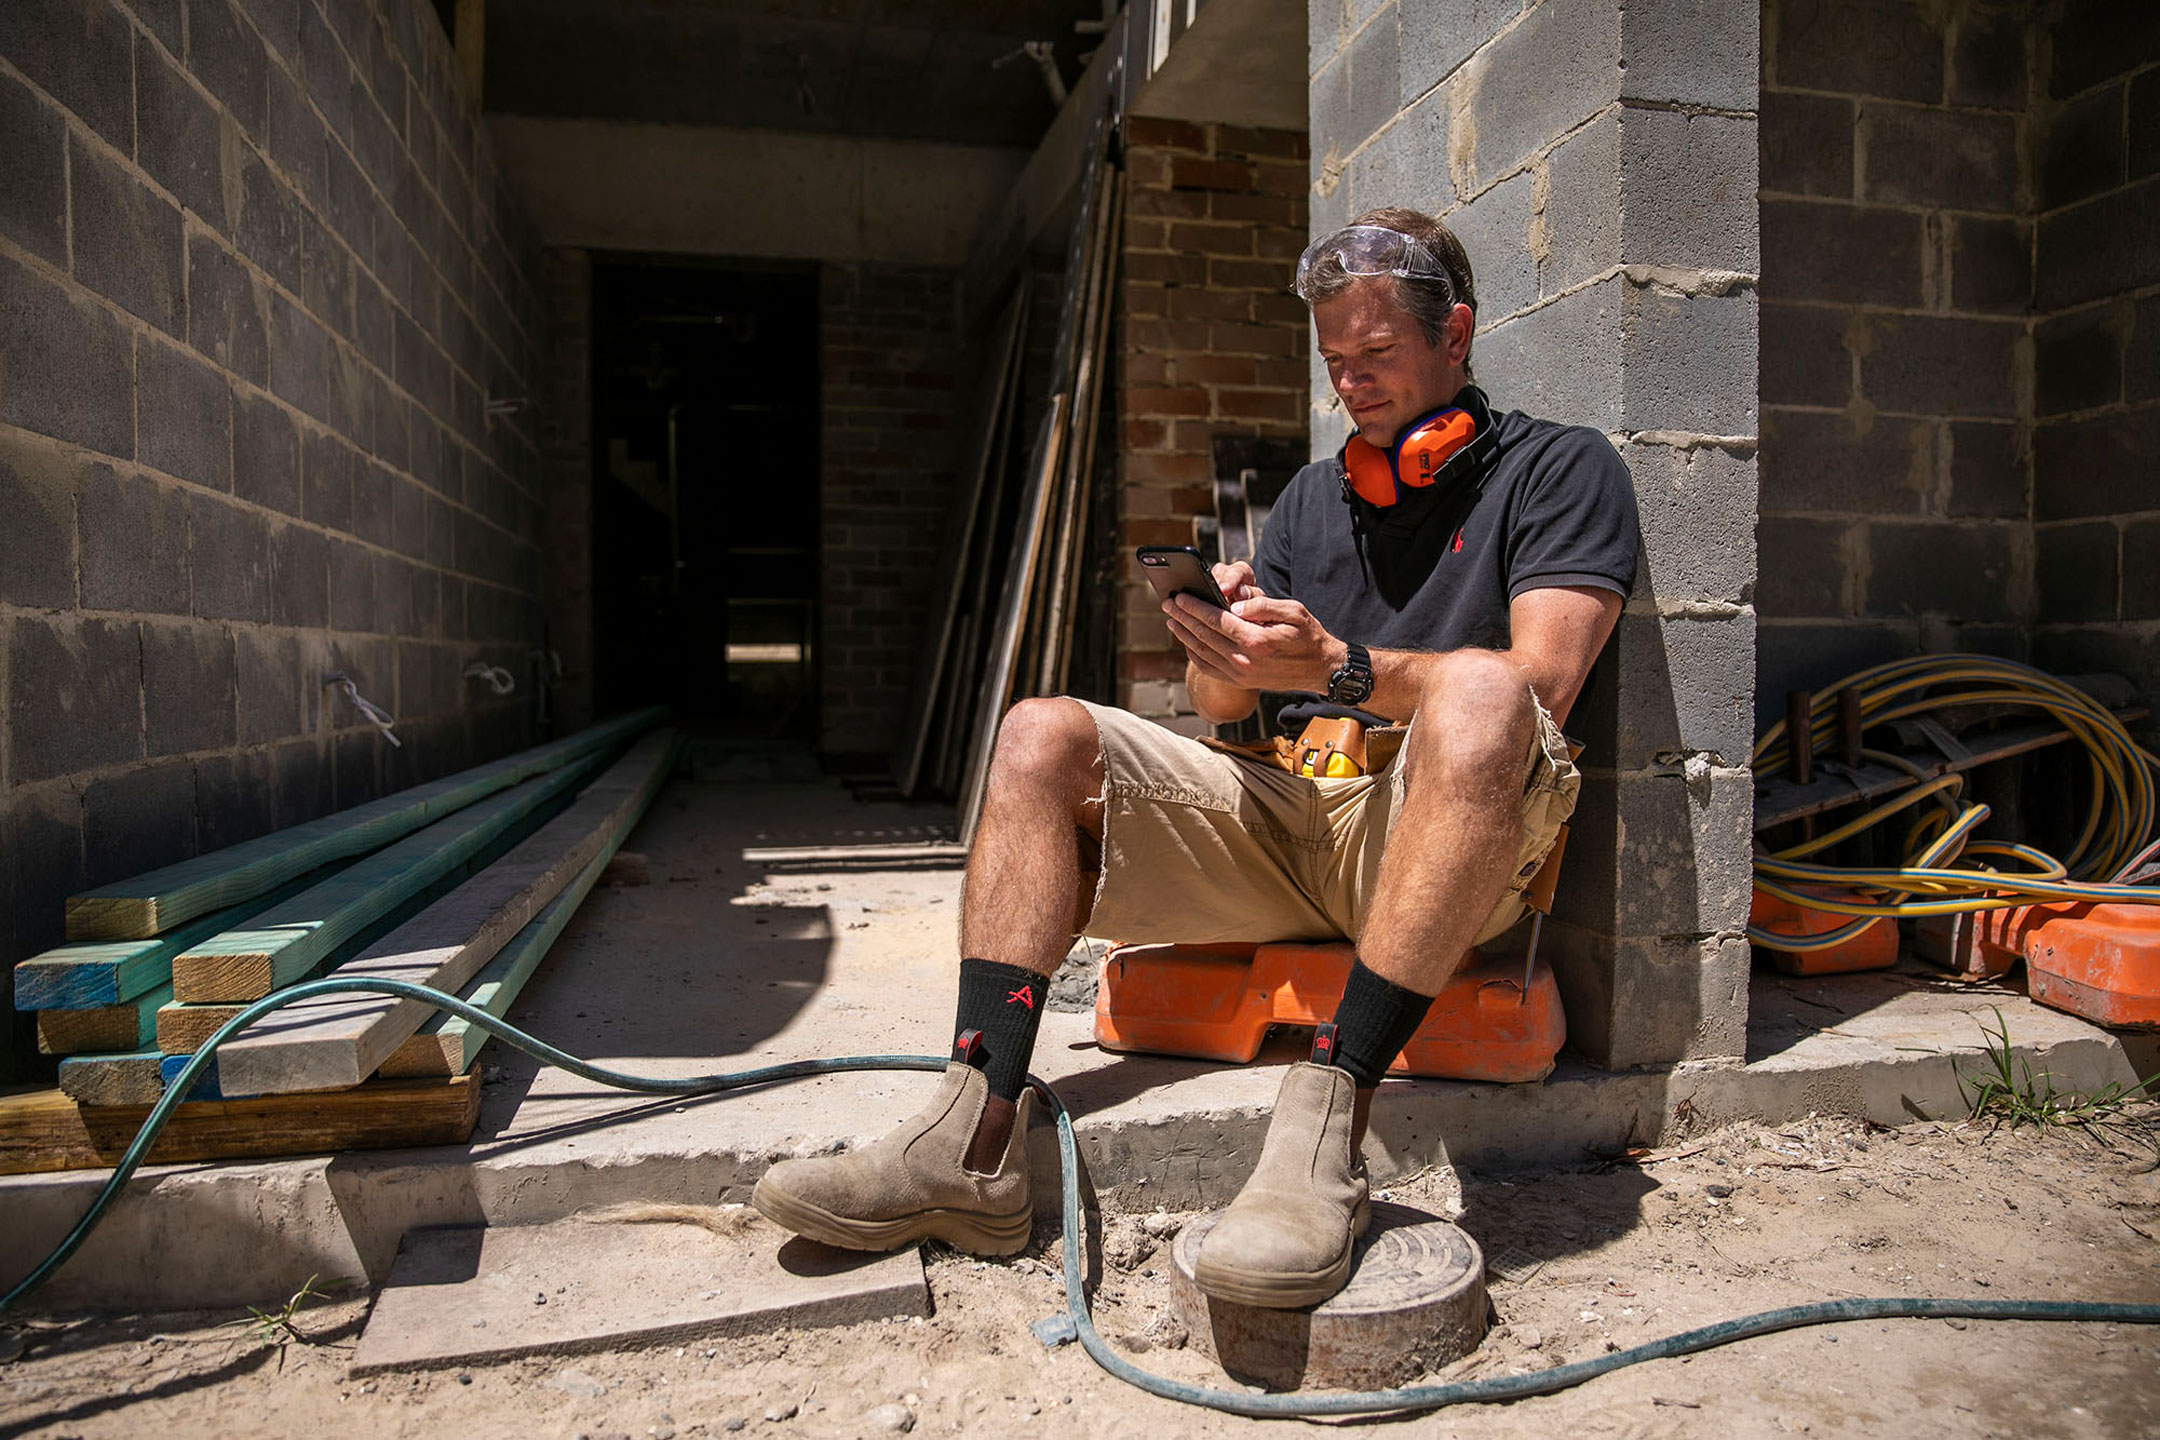 Man on phone at work site